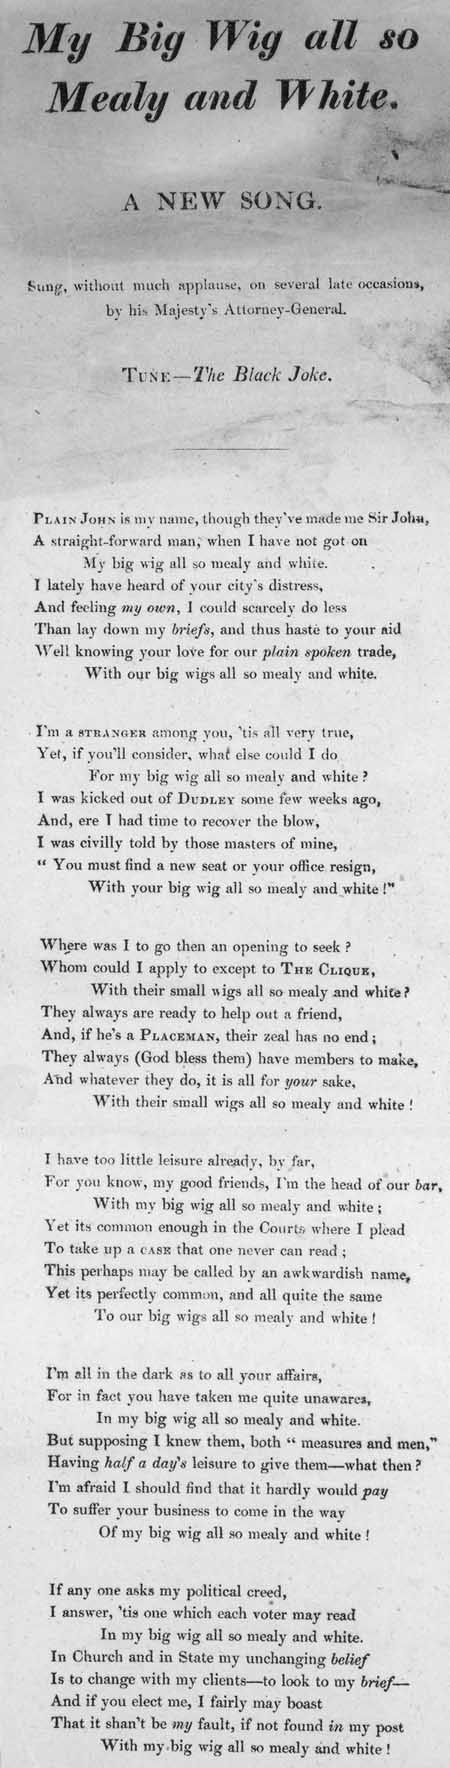 Broadside ballad entitled 'My Big Wig All So Mealy and White'